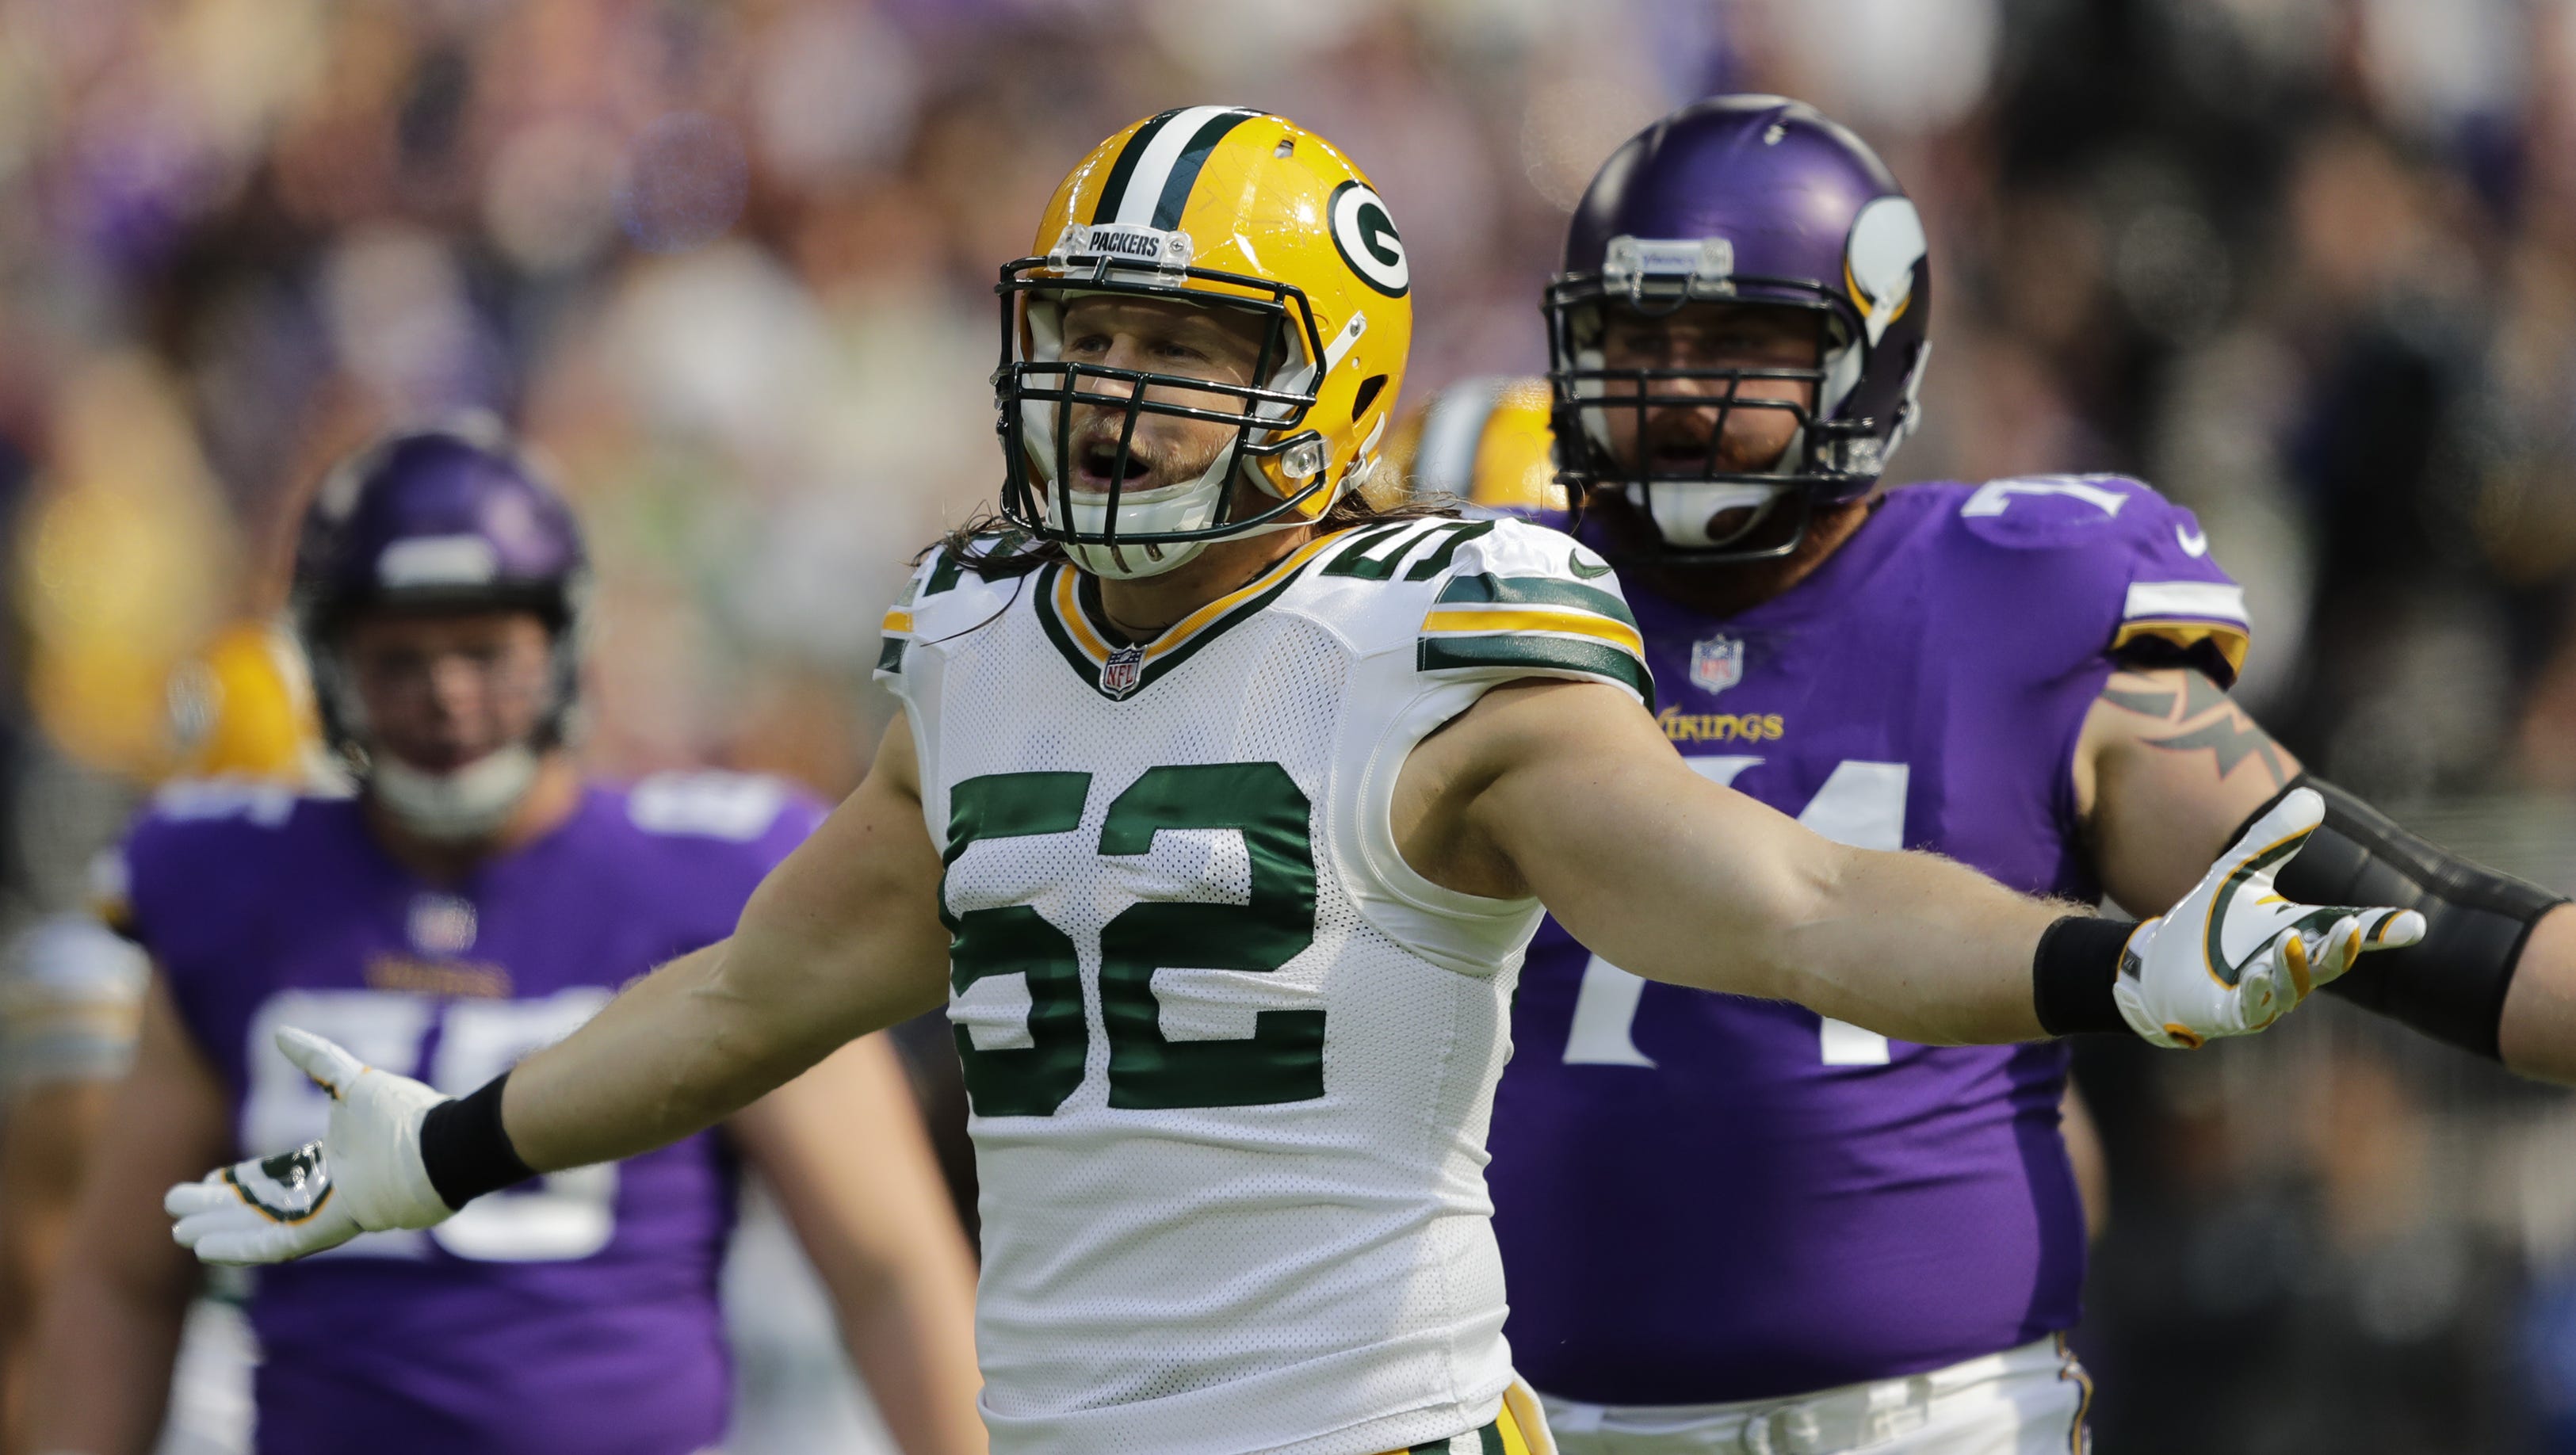 Green Bay Packers outside linebacker Clay Matthews (52) complains about a called penalty during their football game Sunday, October 15, 2017, at U.S. Bank Stadium in Minneapolis, Minn.